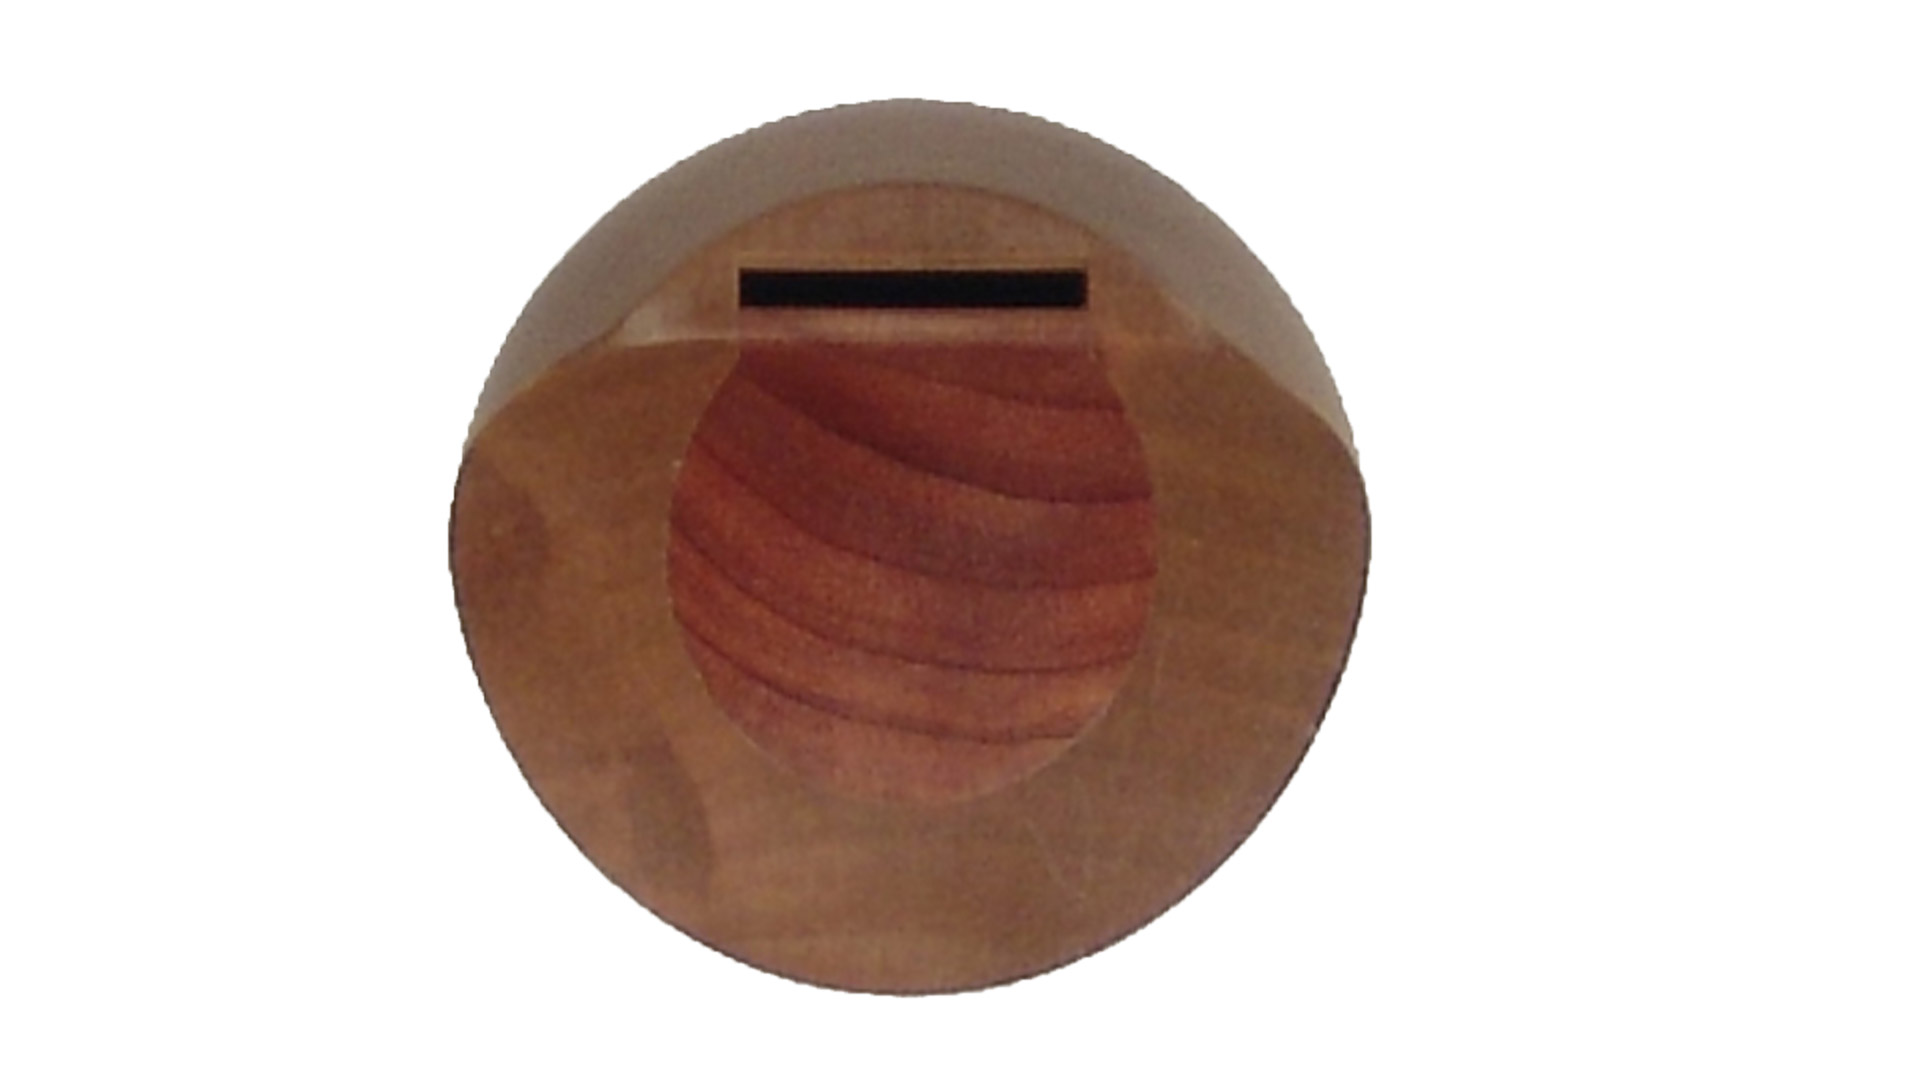 Küng, "STUDIO", tenor in c', baroque double hole, pear wood stained